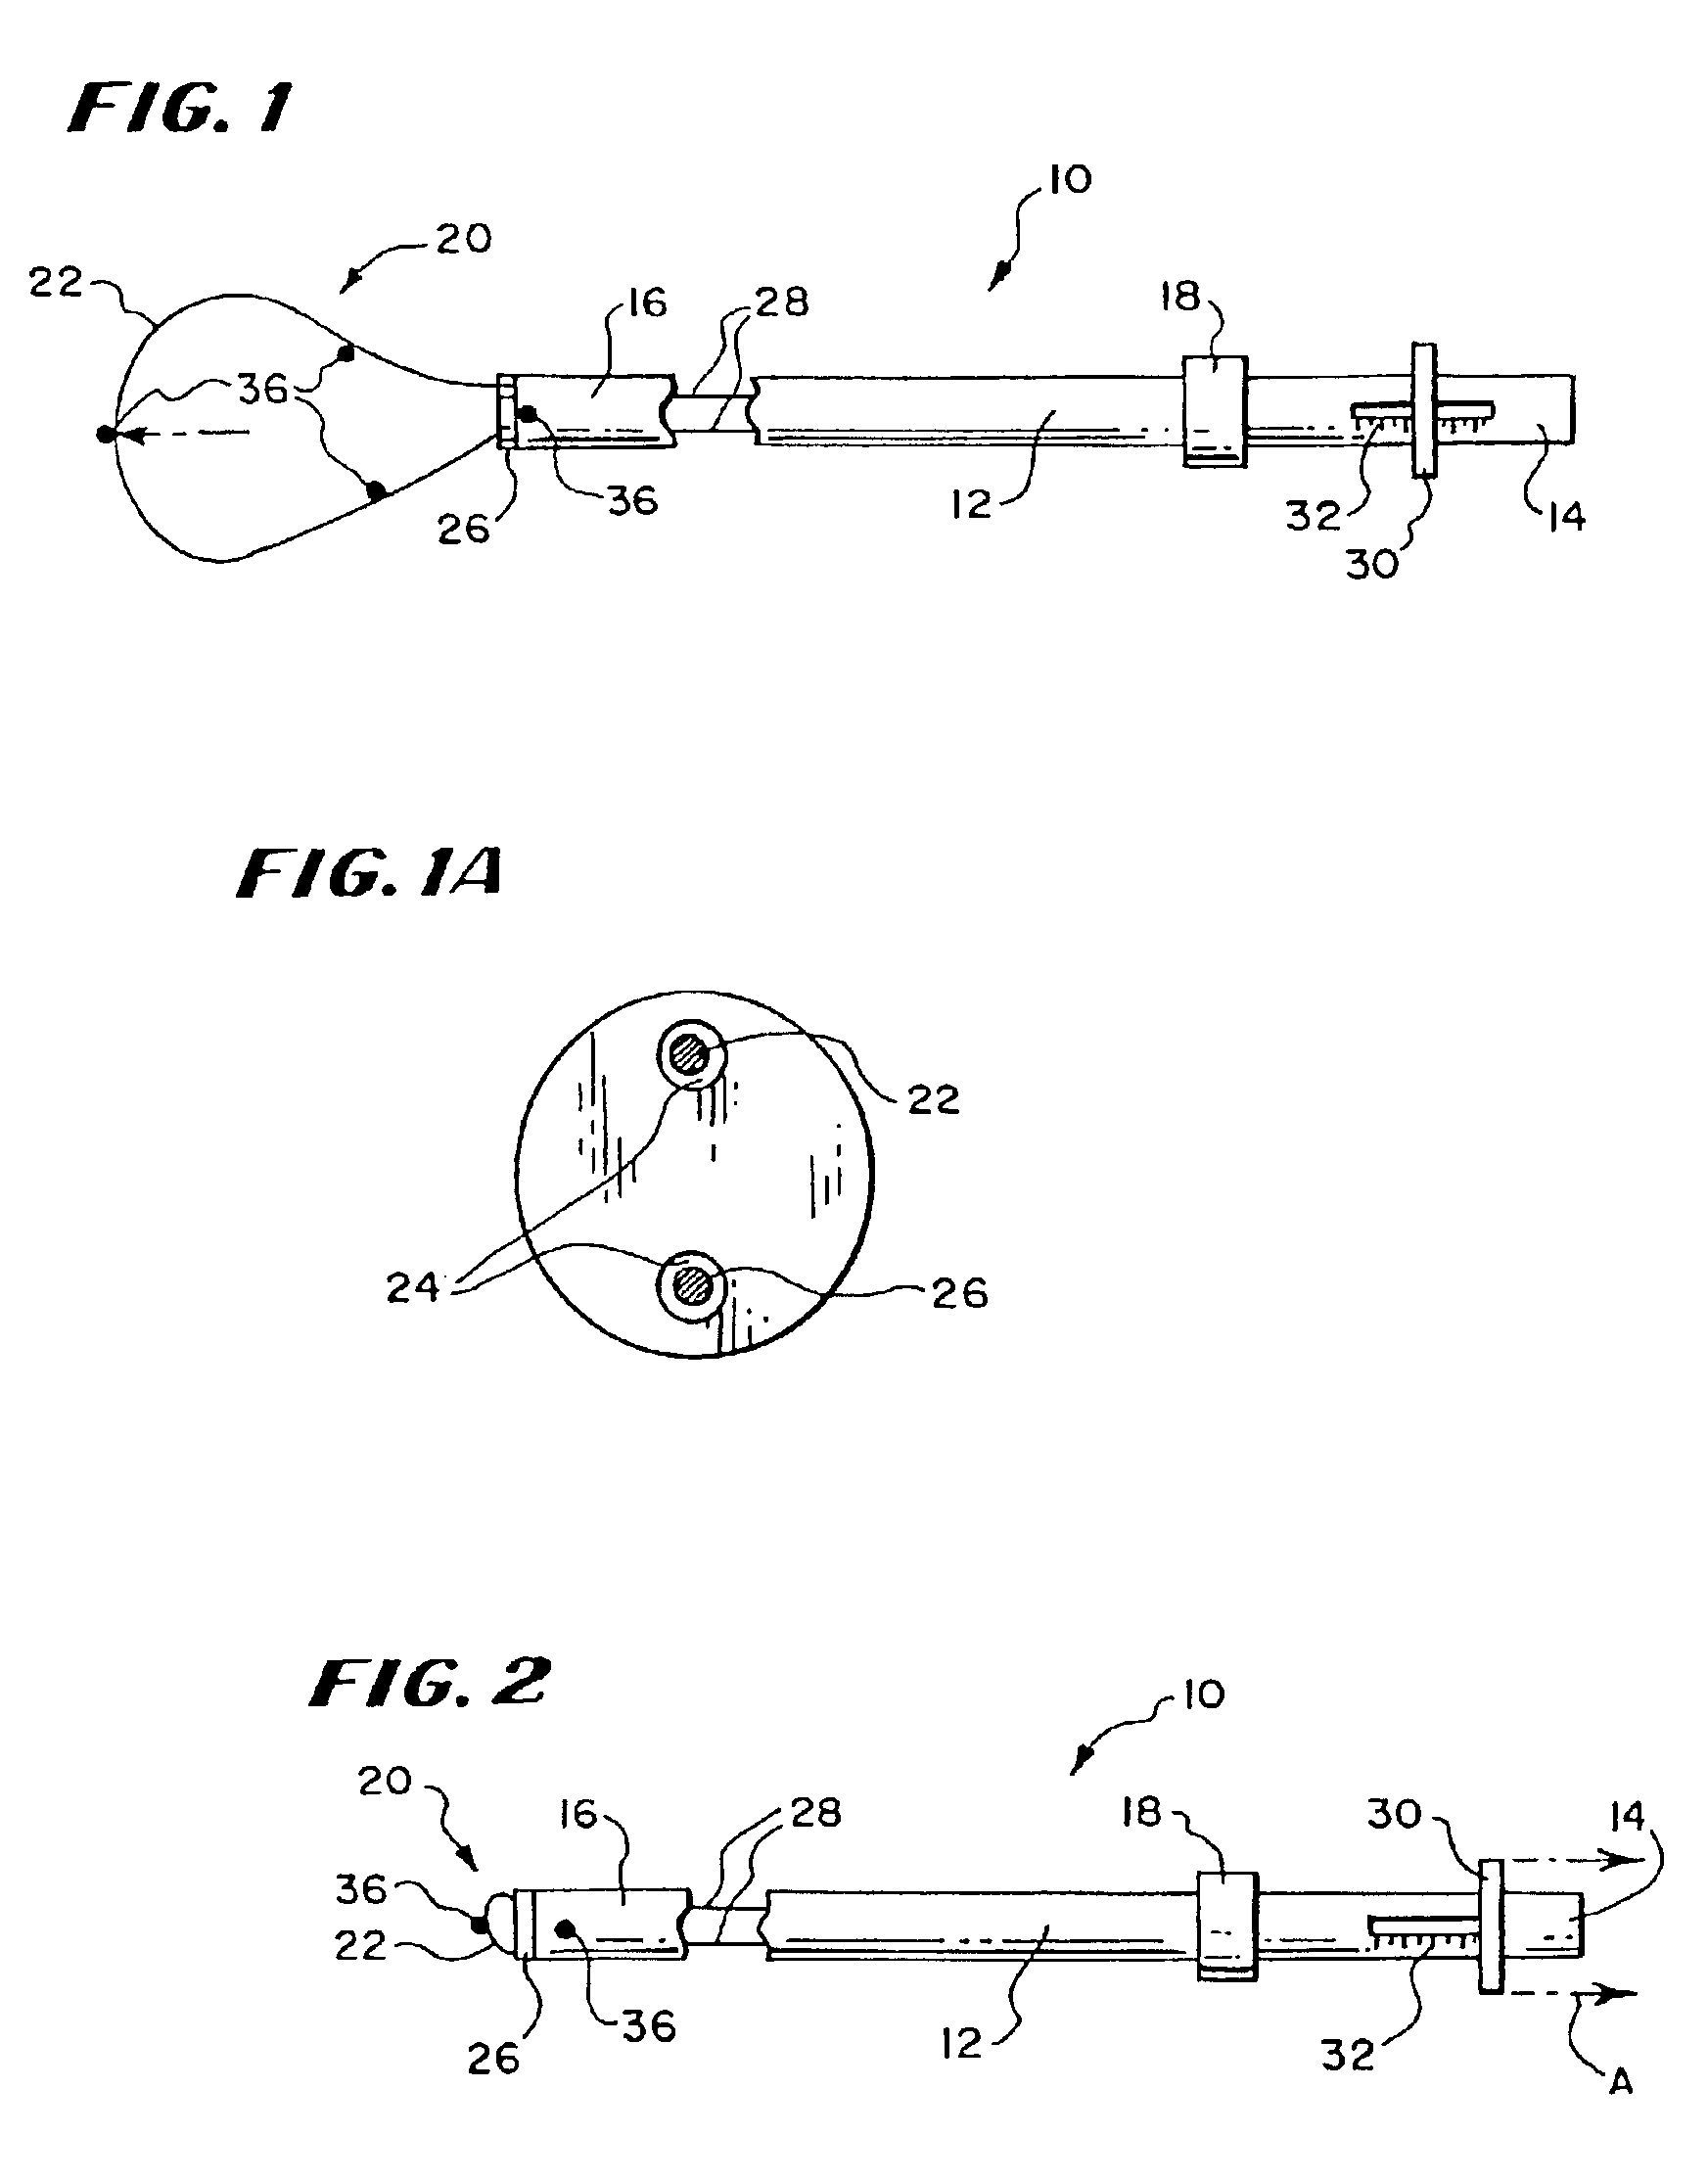 Structures and methods for creating cavities in interior body regions